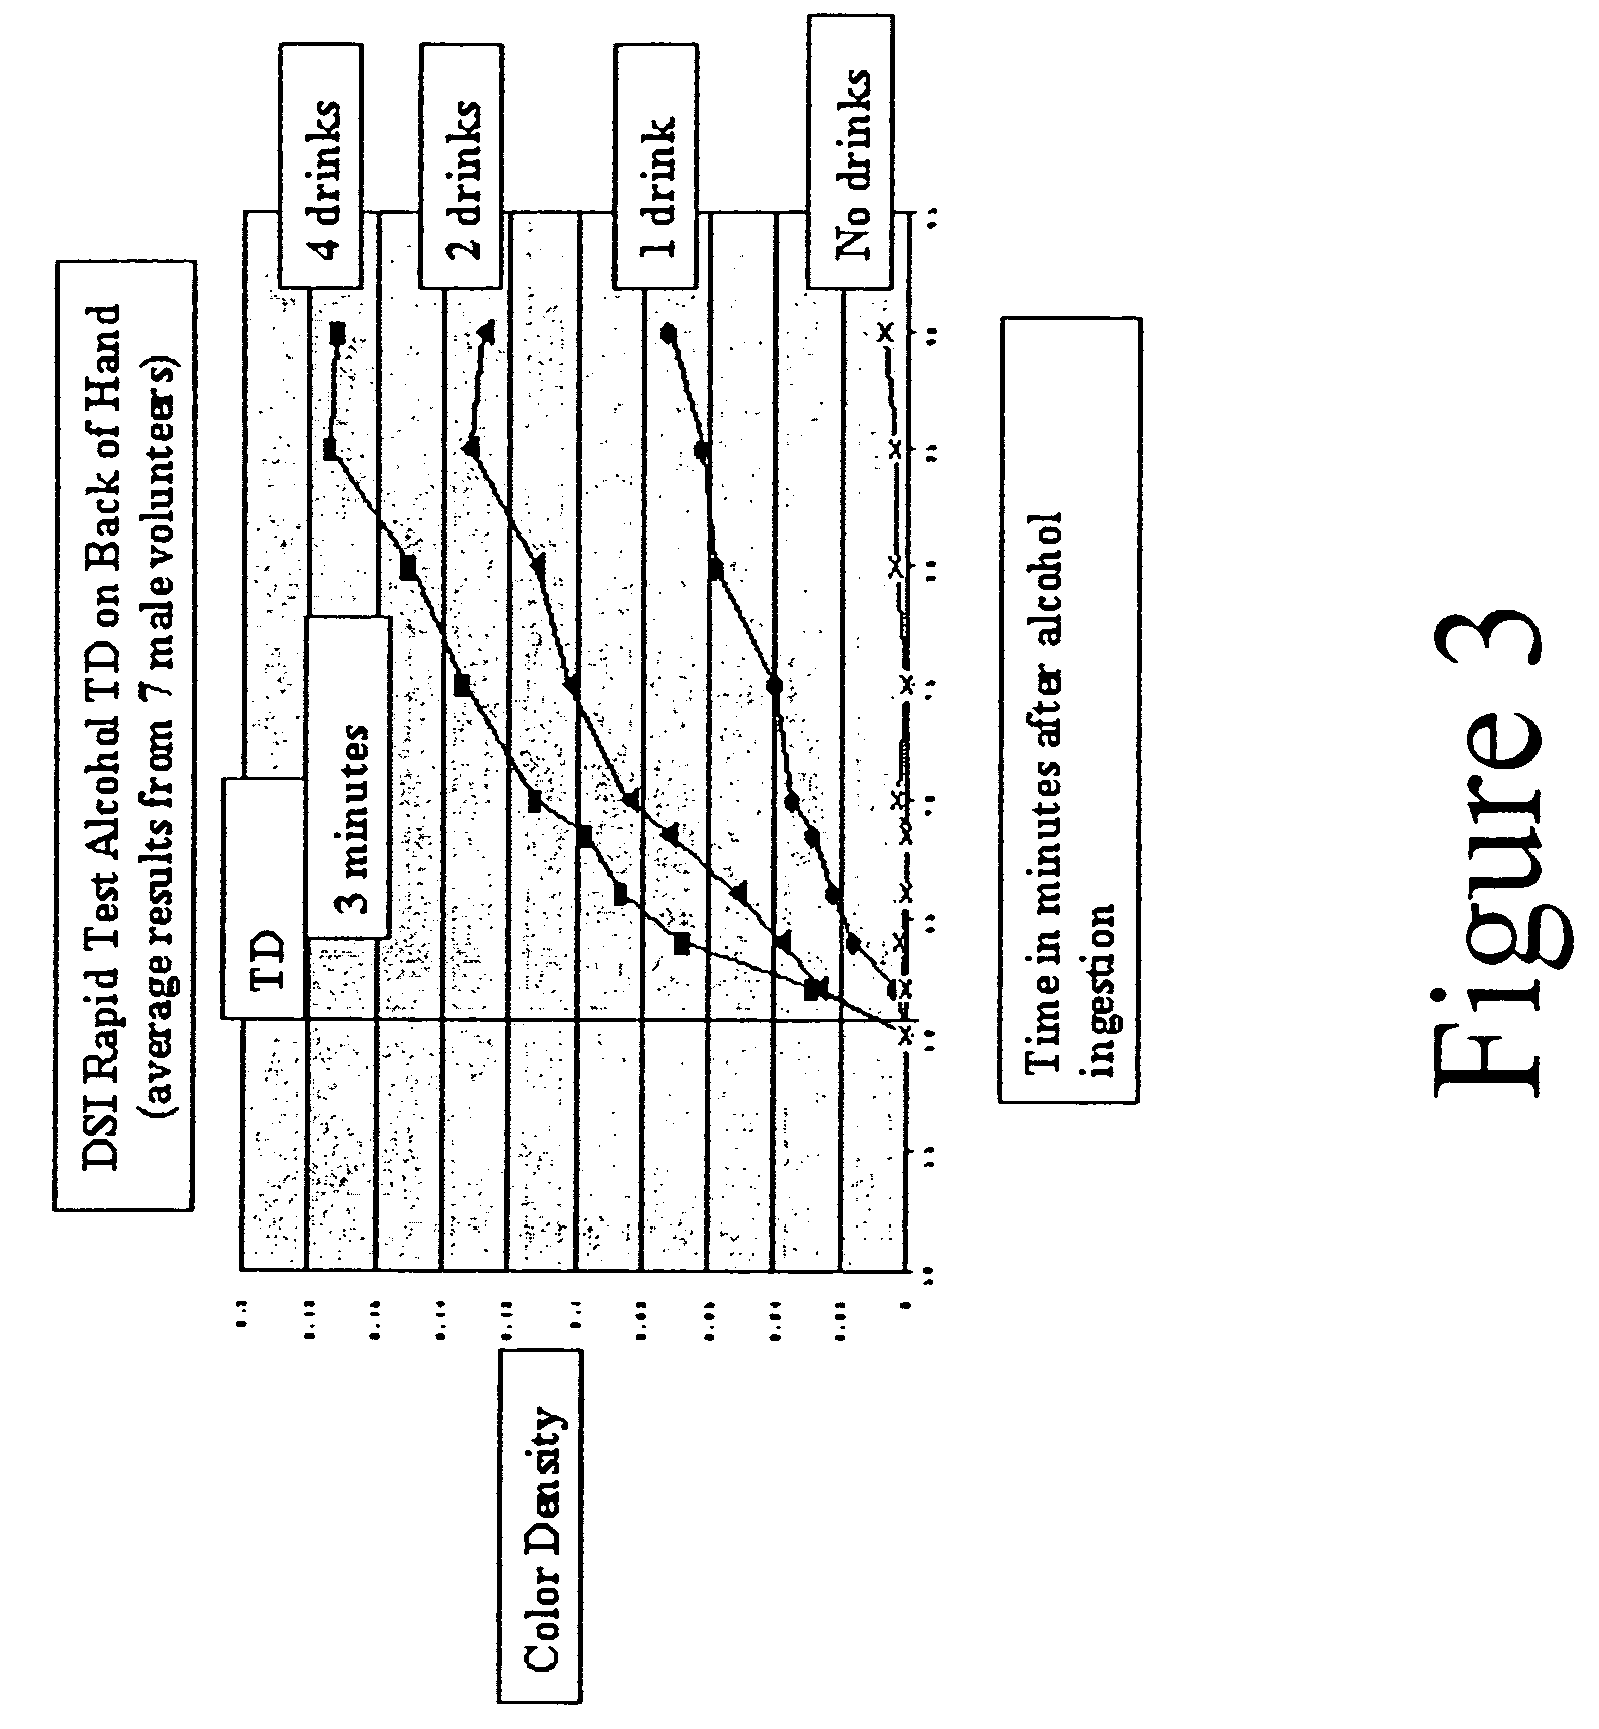 Systems and methods for monitoring health and delivering drugs transdermally